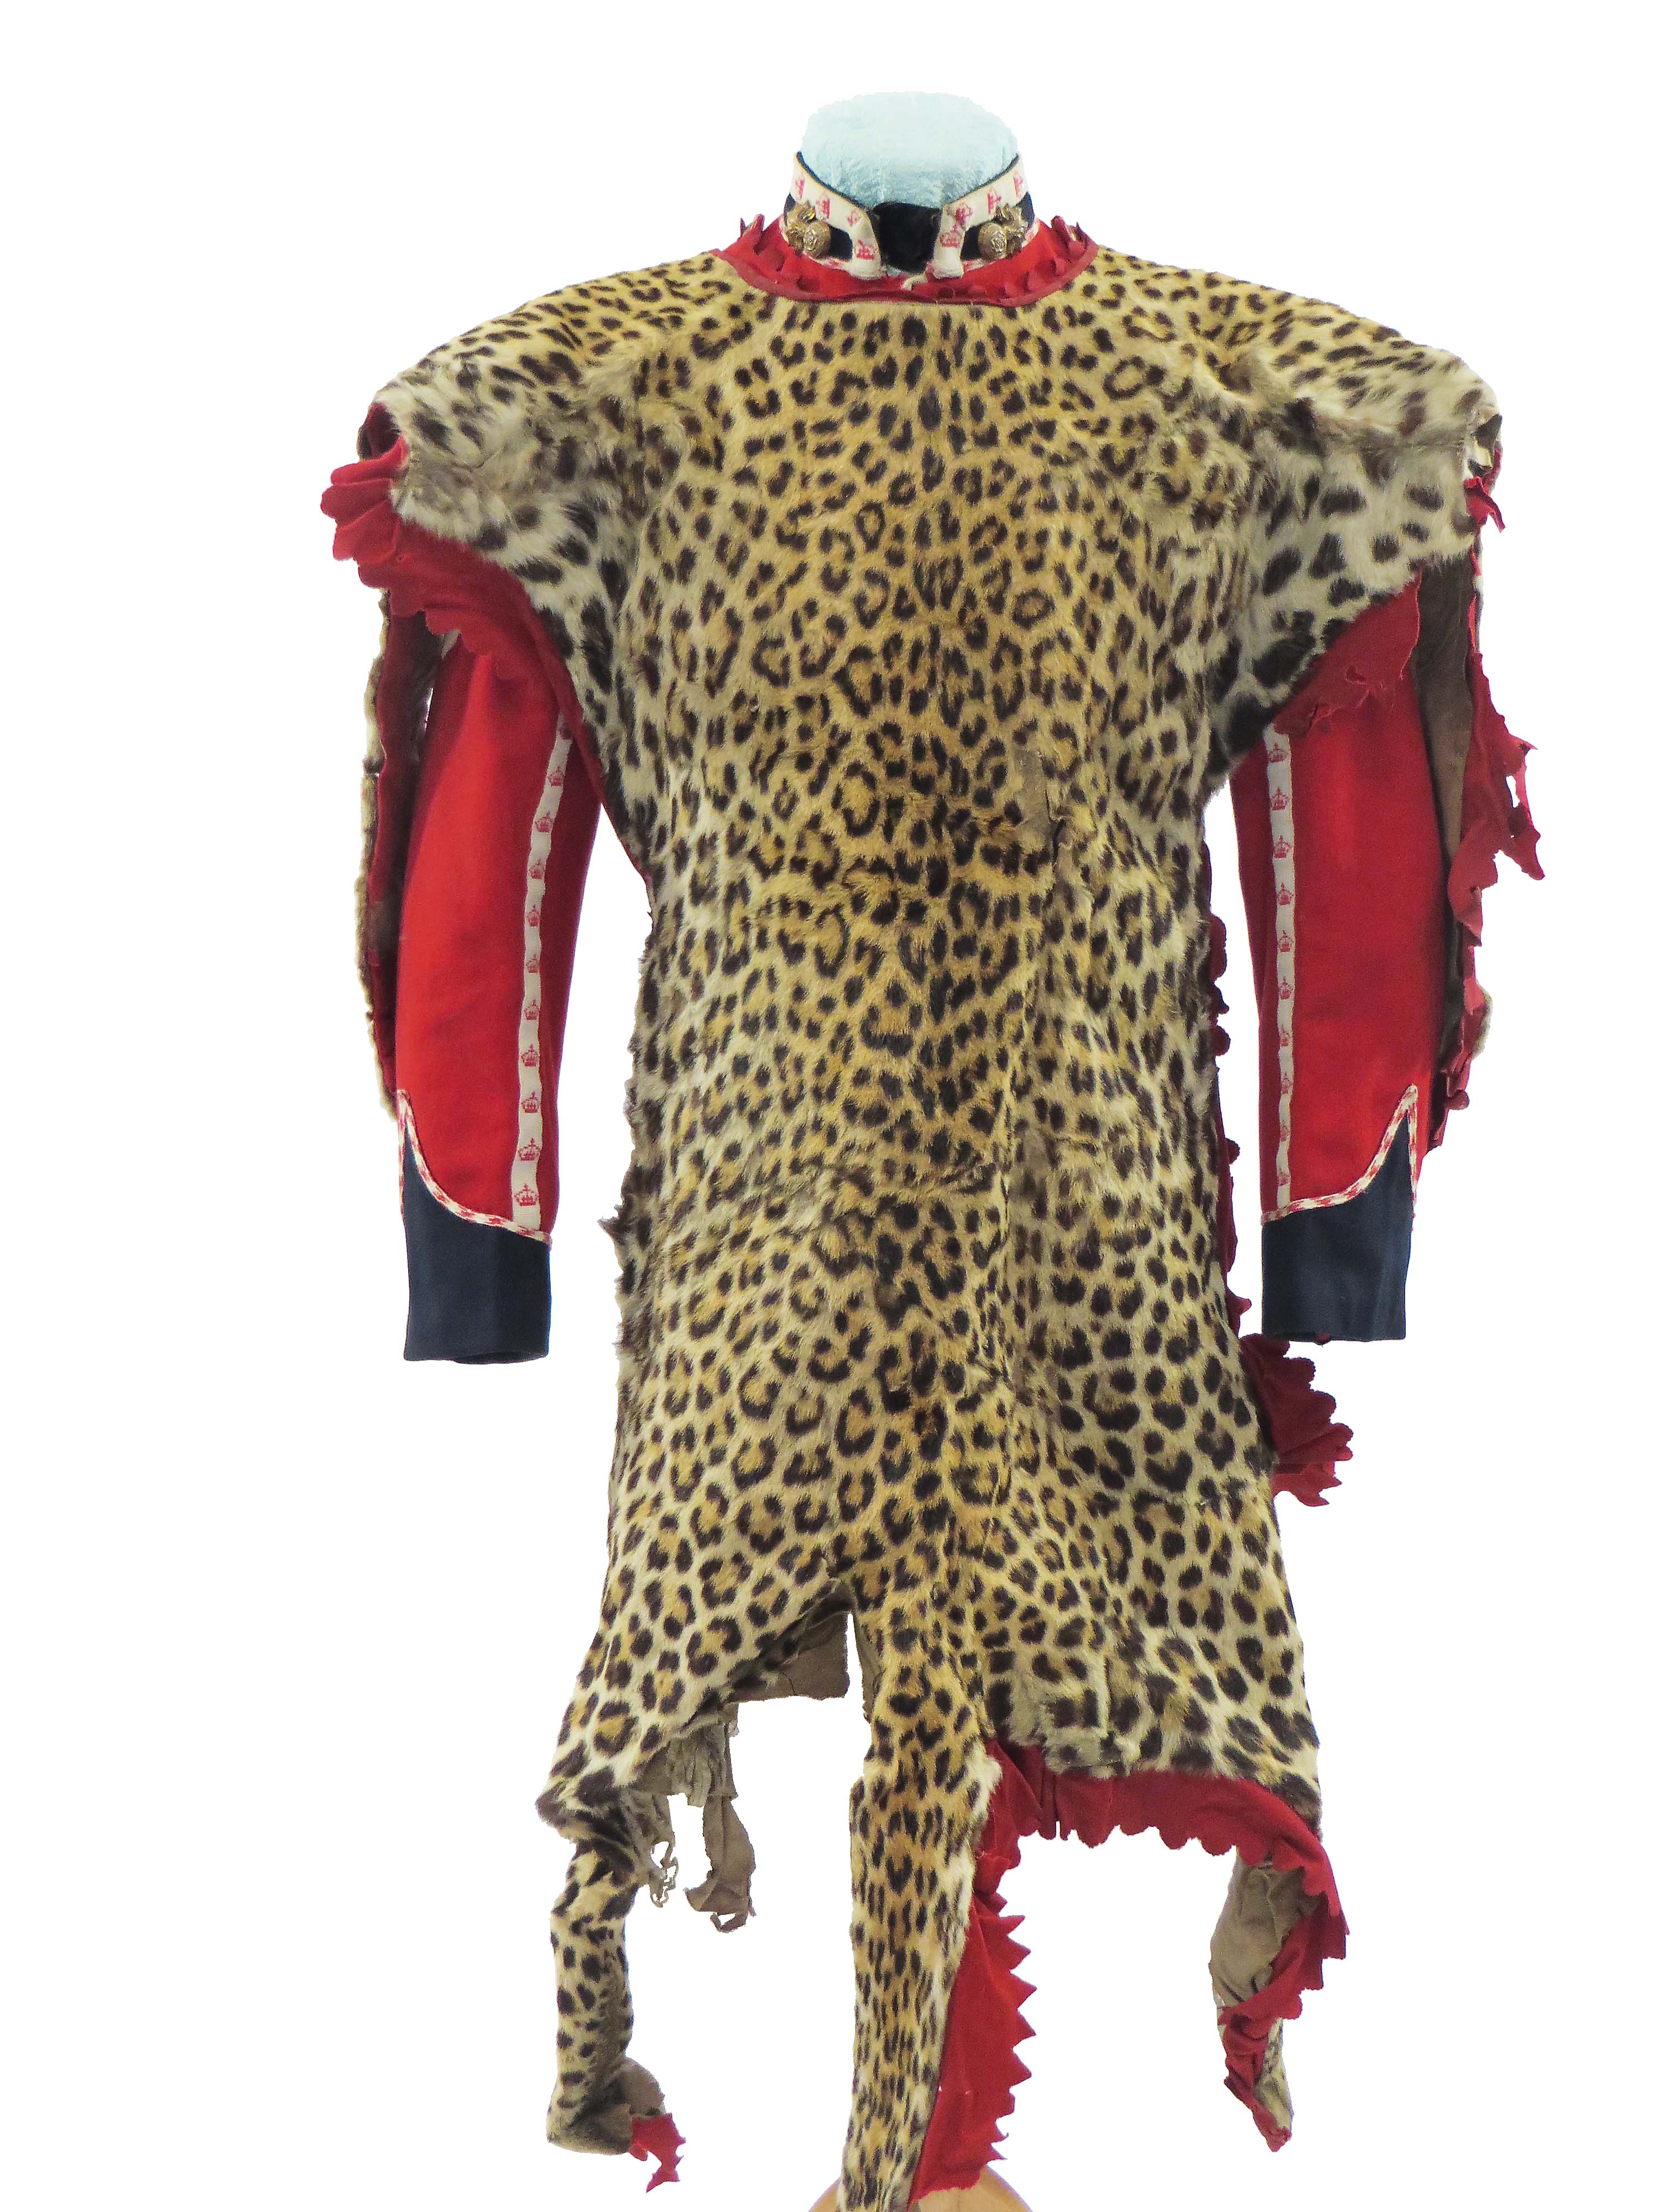 Infantry Bass Drummer’s Leopard Skin Apron antique full leopard skin complete with head fitted